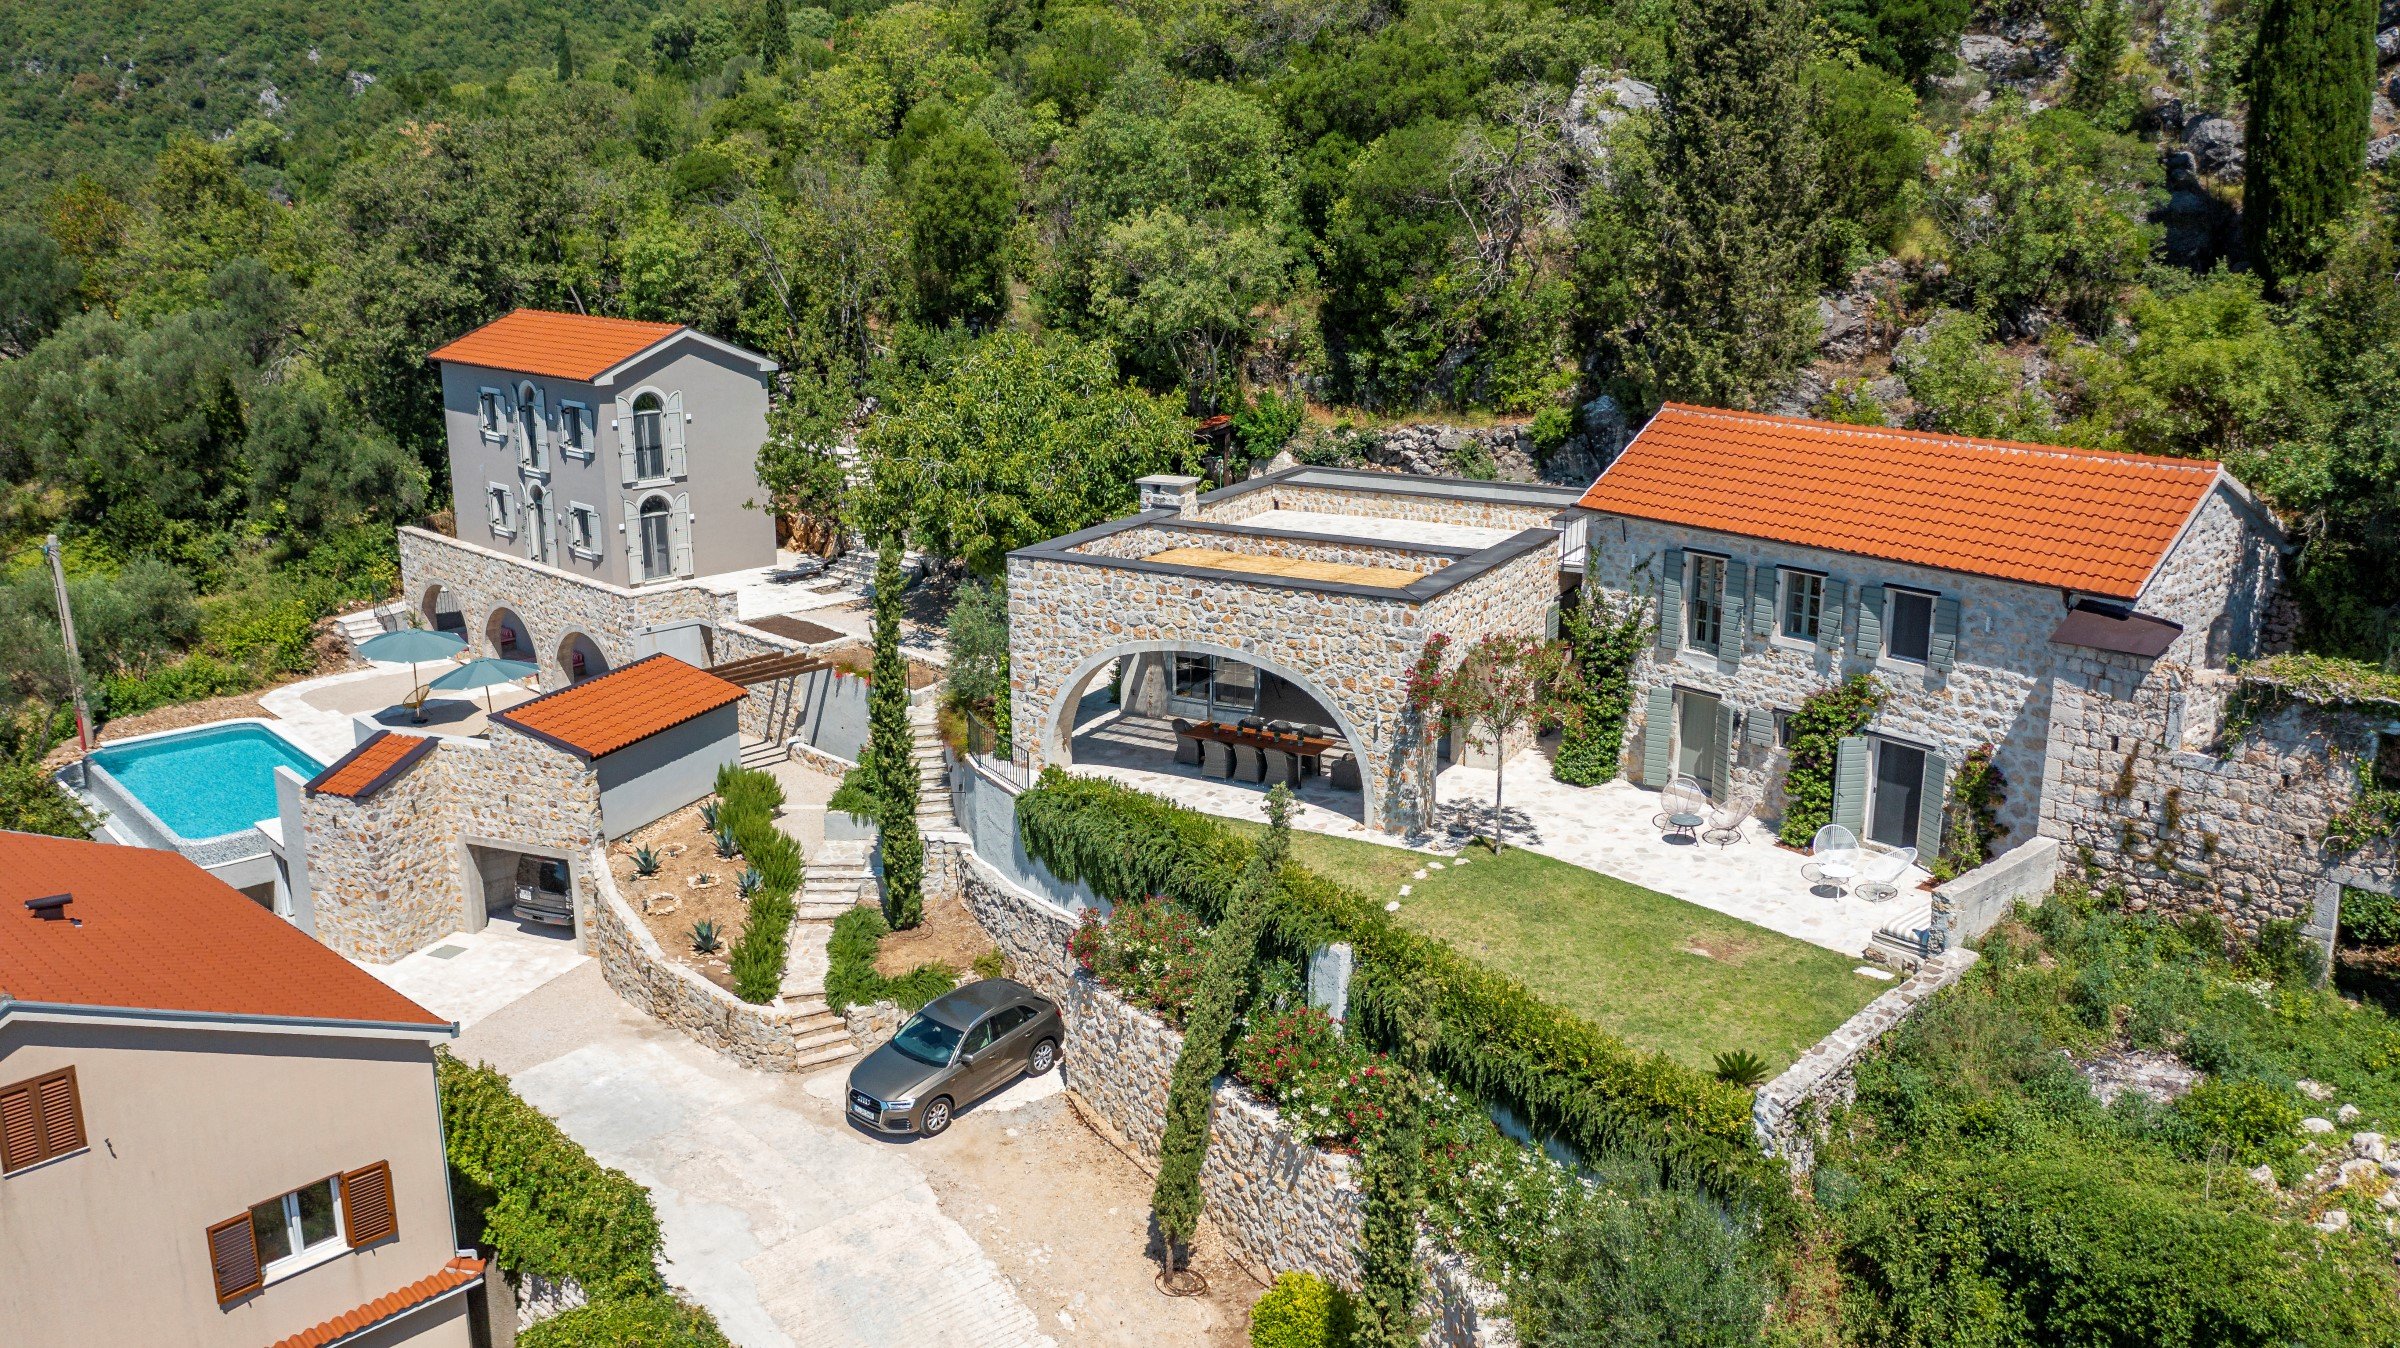 Francis York The Trebesin Boutique Resort Luxury Turnkey Property For Sale in Montenegro 1.jpg